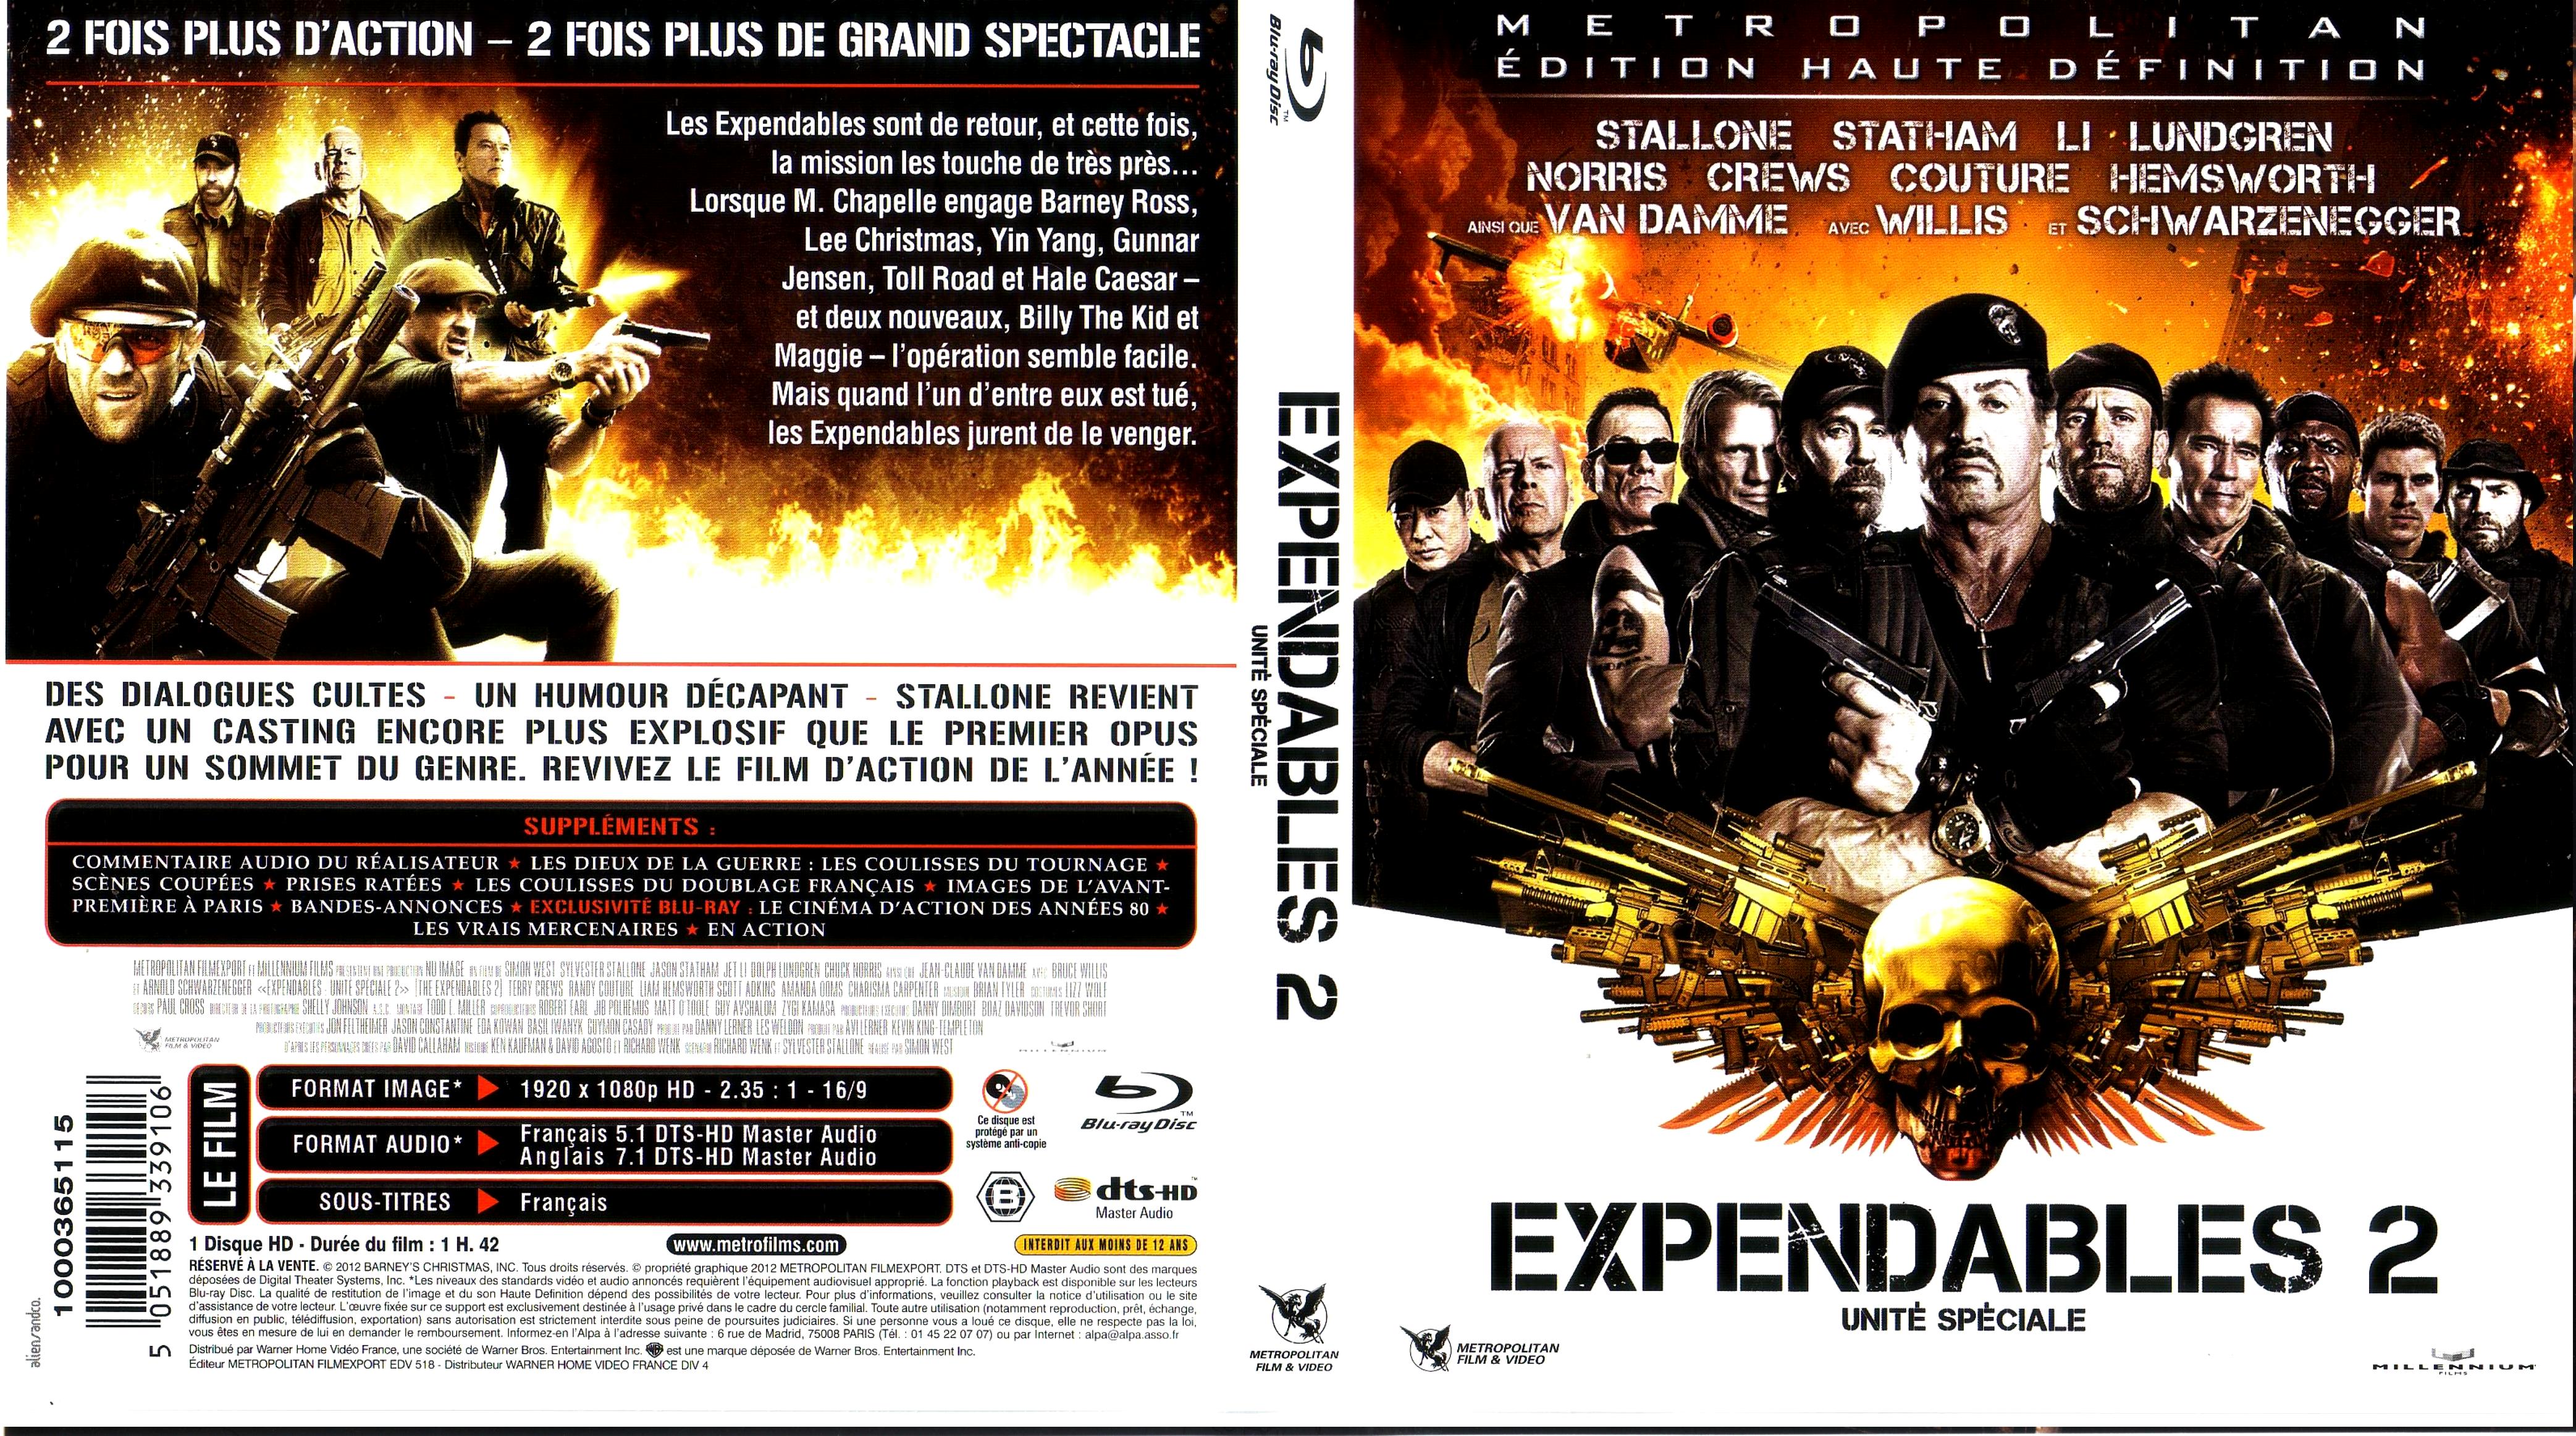 Jaquette DVD The Expendables 2 (BLU-RAY)